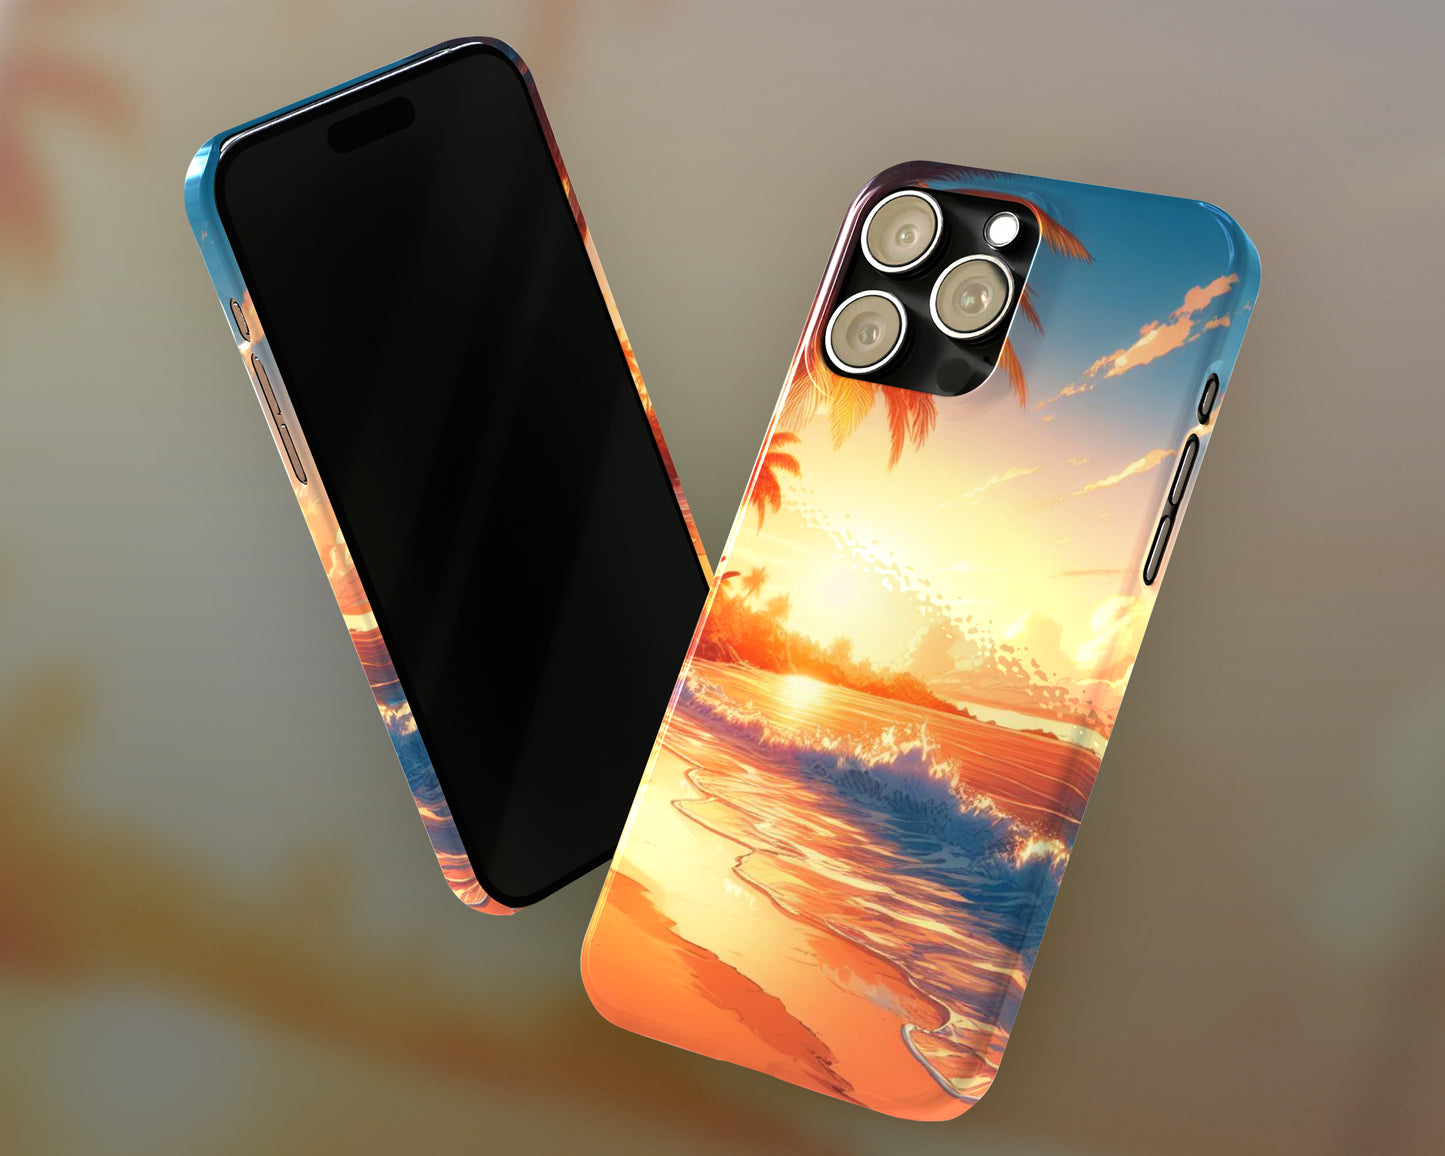 Beaches in anime style iPhone case